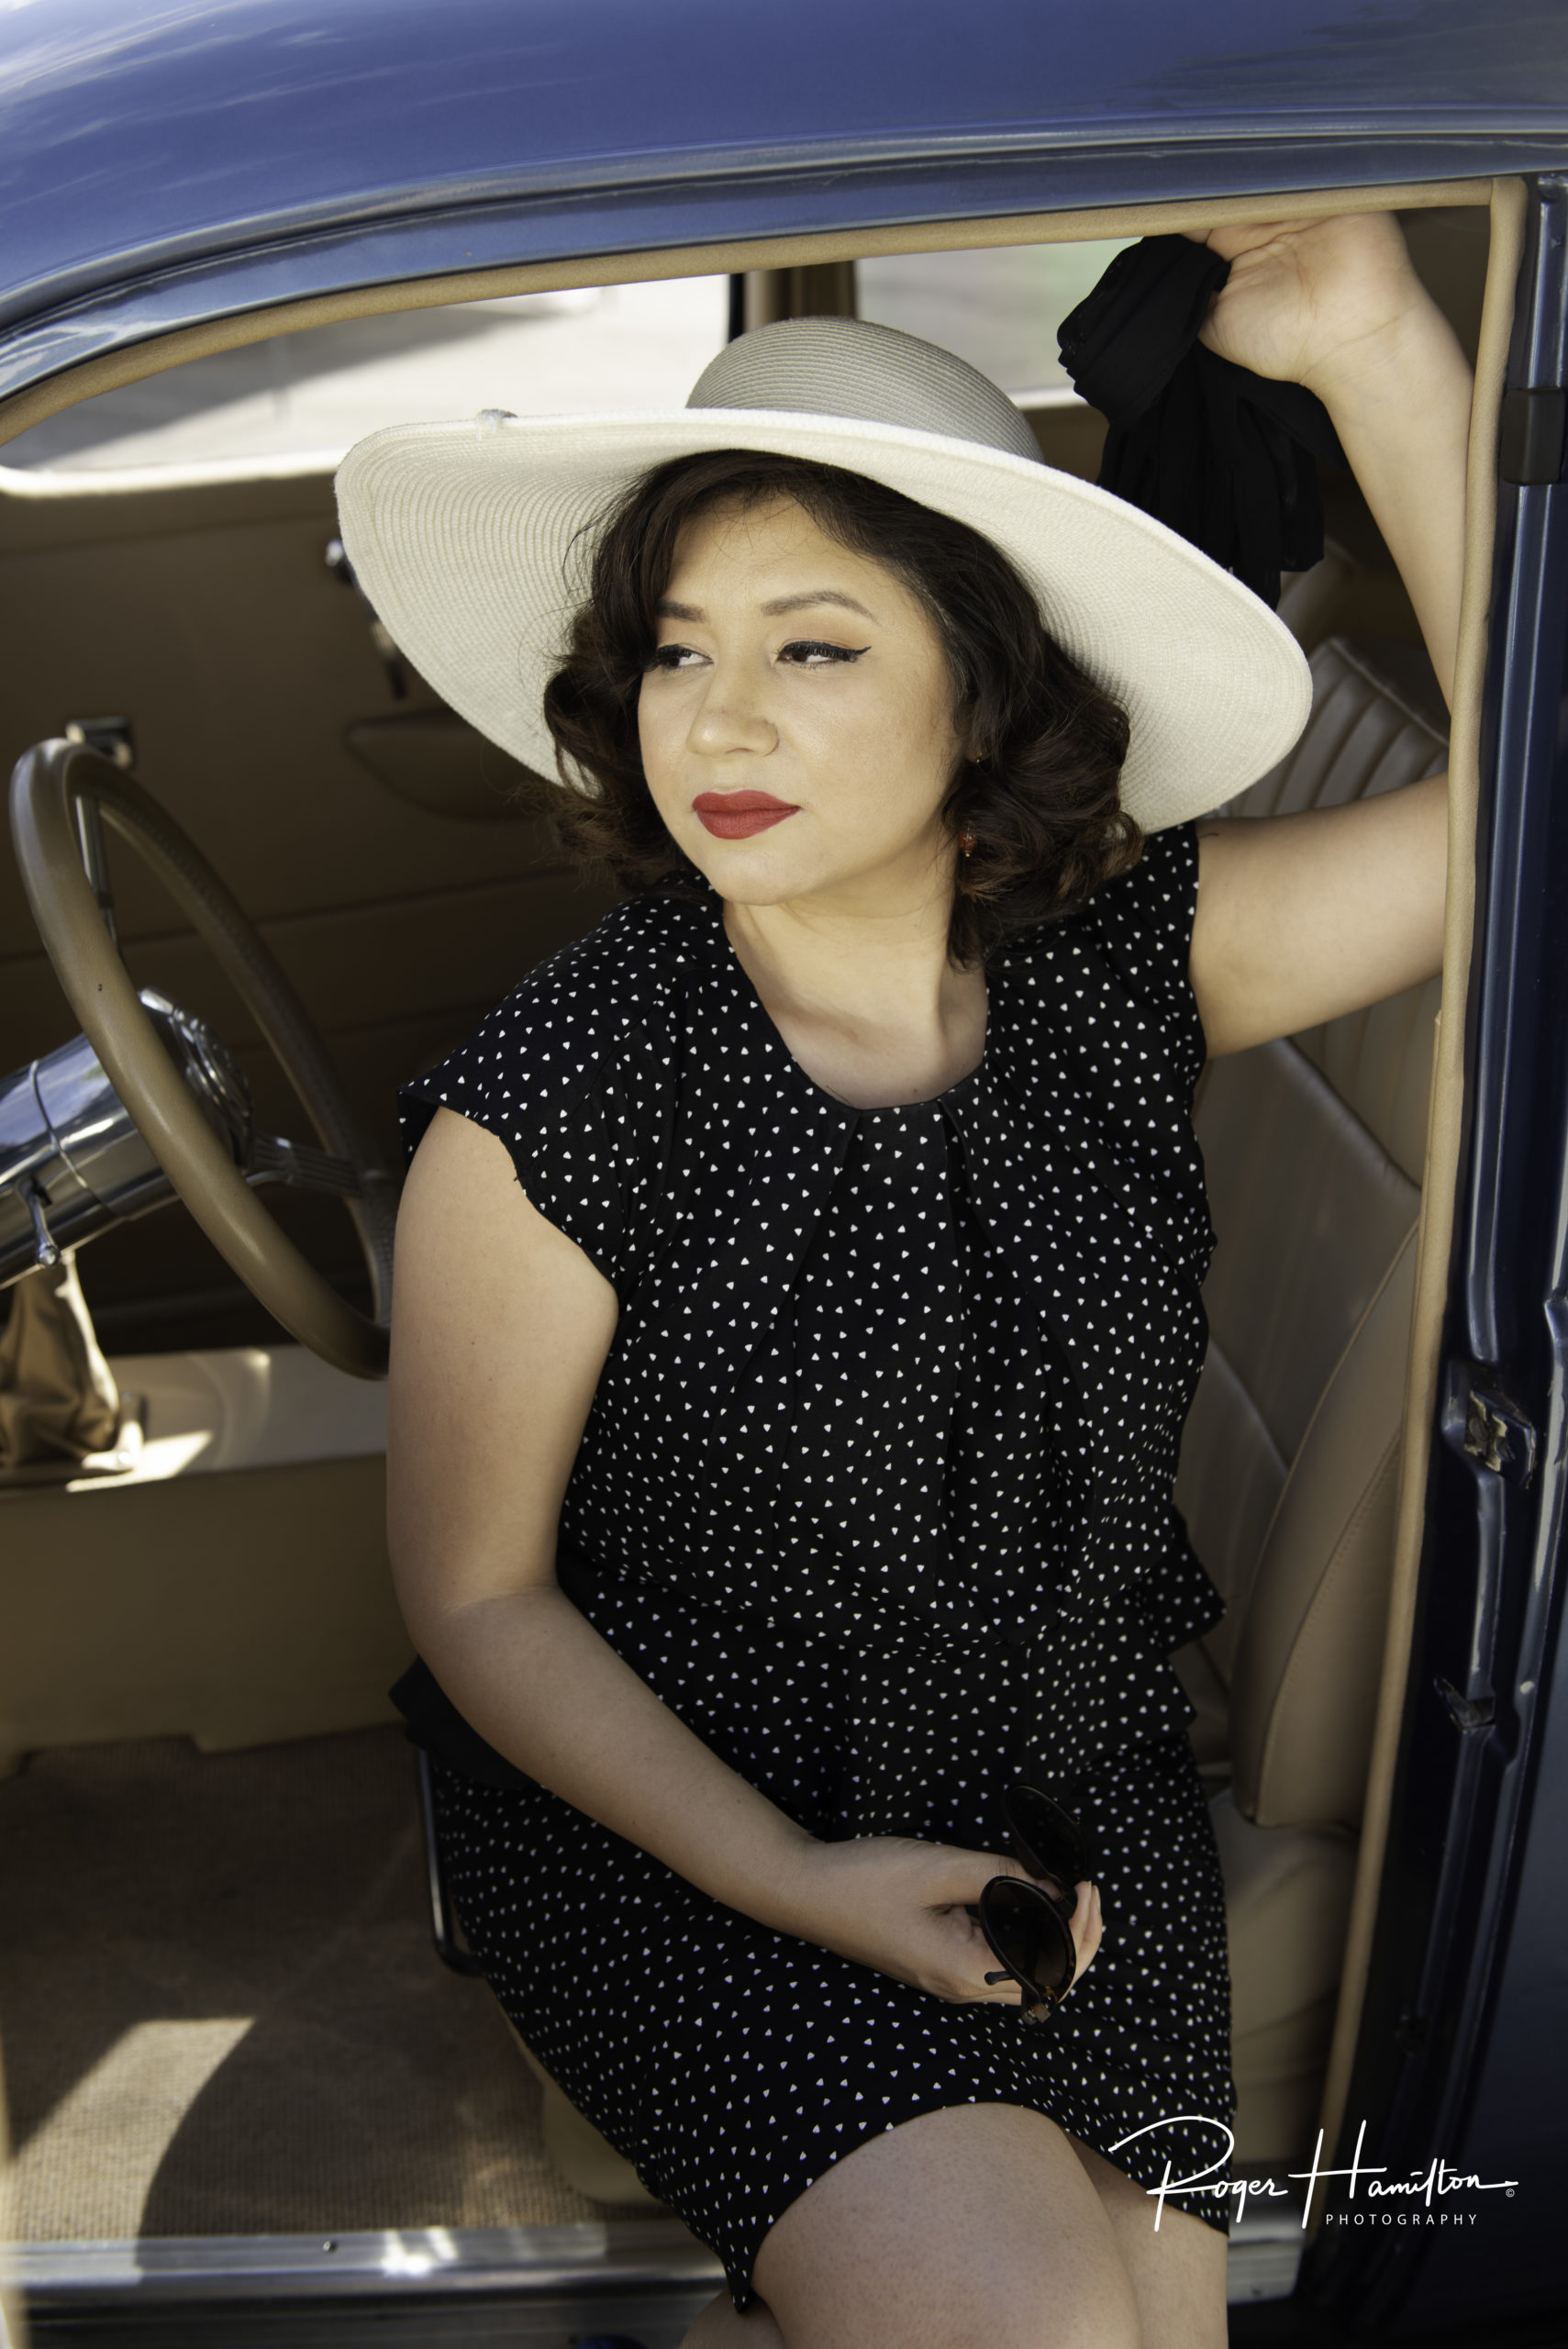 Patricia shows off the 1940s styling with ease